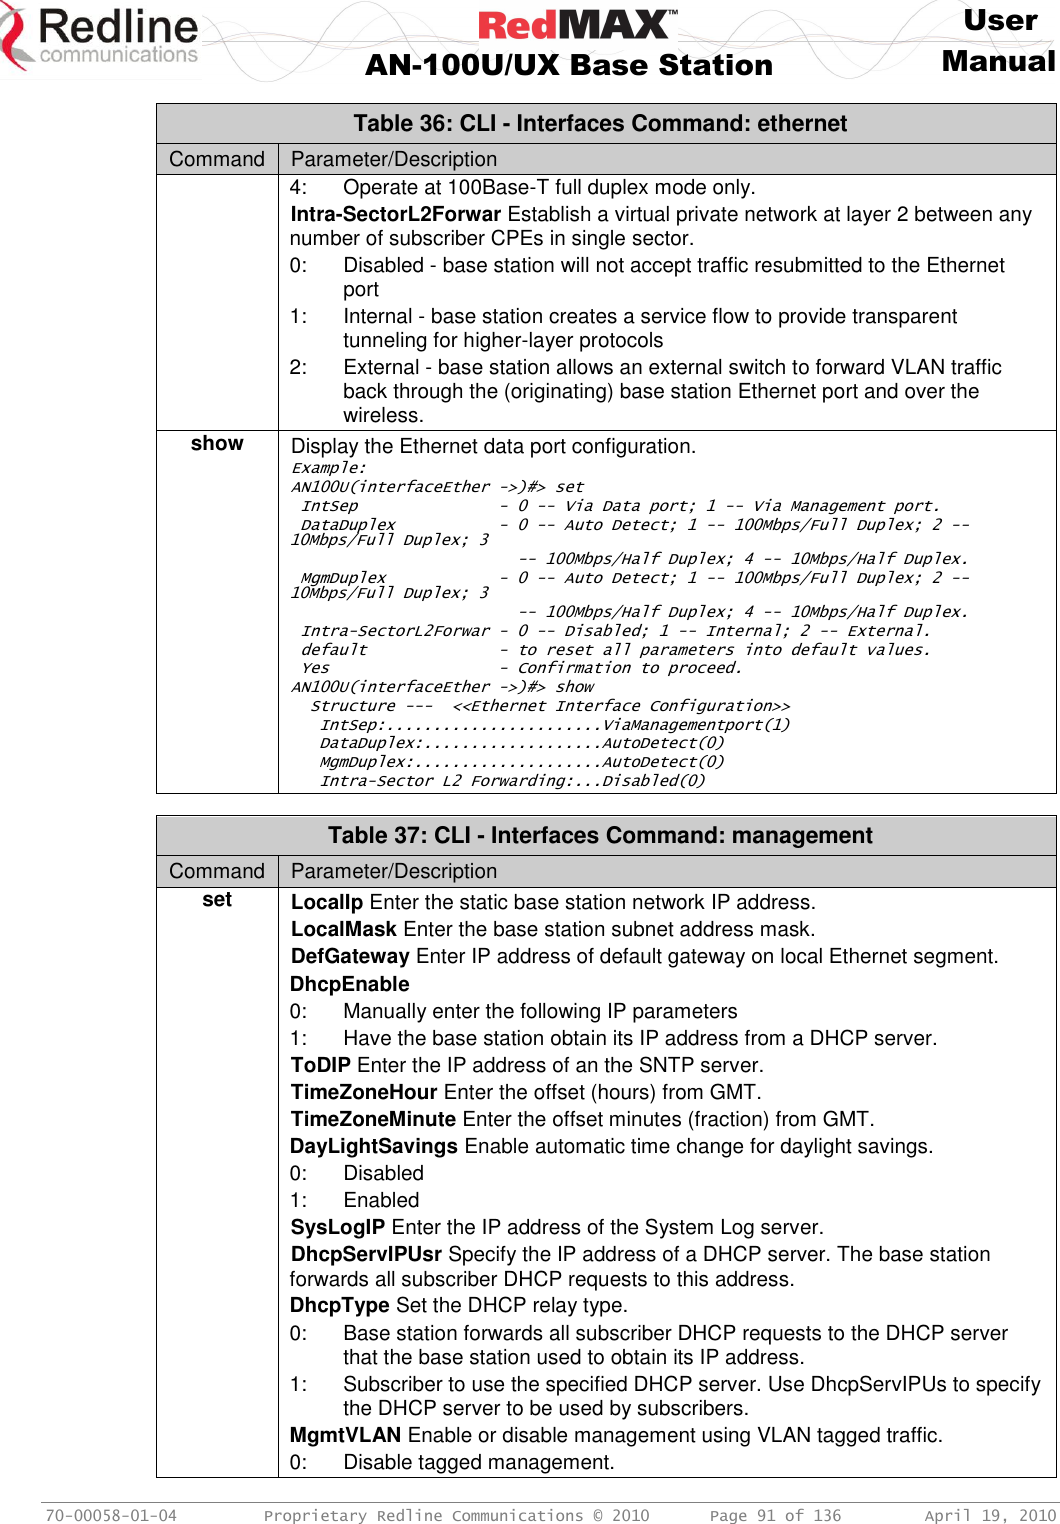     User  AN-100U/UX Base Station Manual   70-00058-01-04  Proprietary Redline Communications © 2010   Page 91 of 136  April 19, 2010 Table 36: CLI - Interfaces Command: ethernet Command Parameter/Description 4:  Operate at 100Base-T full duplex mode only. Intra-SectorL2Forwar Establish a virtual private network at layer 2 between any number of subscriber CPEs in single sector. 0:  Disabled - base station will not accept traffic resubmitted to the Ethernet port 1:  Internal - base station creates a service flow to provide transparent tunneling for higher-layer protocols 2:  External - base station allows an external switch to forward VLAN traffic back through the (originating) base station Ethernet port and over the wireless. show Display the Ethernet data port configuration. Example: AN100U(interfaceEther -&gt;)#&gt; set  IntSep               - 0 -- Via Data port; 1 -- Via Management port.  DataDuplex           - 0 -- Auto Detect; 1 -- 100Mbps/Full Duplex; 2 -- 10Mbps/Full Duplex; 3                         -- 100Mbps/Half Duplex; 4 -- 10Mbps/Half Duplex.  MgmDuplex            - 0 -- Auto Detect; 1 -- 100Mbps/Full Duplex; 2 -- 10Mbps/Full Duplex; 3                         -- 100Mbps/Half Duplex; 4 -- 10Mbps/Half Duplex.  Intra-SectorL2Forwar - 0 -- Disabled; 1 -- Internal; 2 -- External.  default              - to reset all parameters into default values.  Yes                  - Confirmation to proceed. AN100U(interfaceEther -&gt;)#&gt; show   Structure ---  &lt;&lt;Ethernet Interface Configuration&gt;&gt;    IntSep:.......................ViaManagementport(1)    DataDuplex:...................AutoDetect(0)    MgmDuplex:....................AutoDetect(0)    Intra-Sector L2 Forwarding:...Disabled(0)   Table 37: CLI - Interfaces Command: management Command Parameter/Description set LocalIp Enter the static base station network IP address. LocalMask Enter the base station subnet address mask. DefGateway Enter IP address of default gateway on local Ethernet segment. DhcpEnable 0: Manually enter the following IP parameters 1:  Have the base station obtain its IP address from a DHCP server. ToDIP Enter the IP address of an the SNTP server. TimeZoneHour Enter the offset (hours) from GMT. TimeZoneMinute Enter the offset minutes (fraction) from GMT. DayLightSavings Enable automatic time change for daylight savings.  0:  Disabled 1:  Enabled SysLogIP Enter the IP address of the System Log server. DhcpServIPUsr Specify the IP address of a DHCP server. The base station forwards all subscriber DHCP requests to this address. DhcpType Set the DHCP relay type.  0:  Base station forwards all subscriber DHCP requests to the DHCP server that the base station used to obtain its IP address. 1:  Subscriber to use the specified DHCP server. Use DhcpServIPUs to specify the DHCP server to be used by subscribers. MgmtVLAN Enable or disable management using VLAN tagged traffic. 0:  Disable tagged management. 